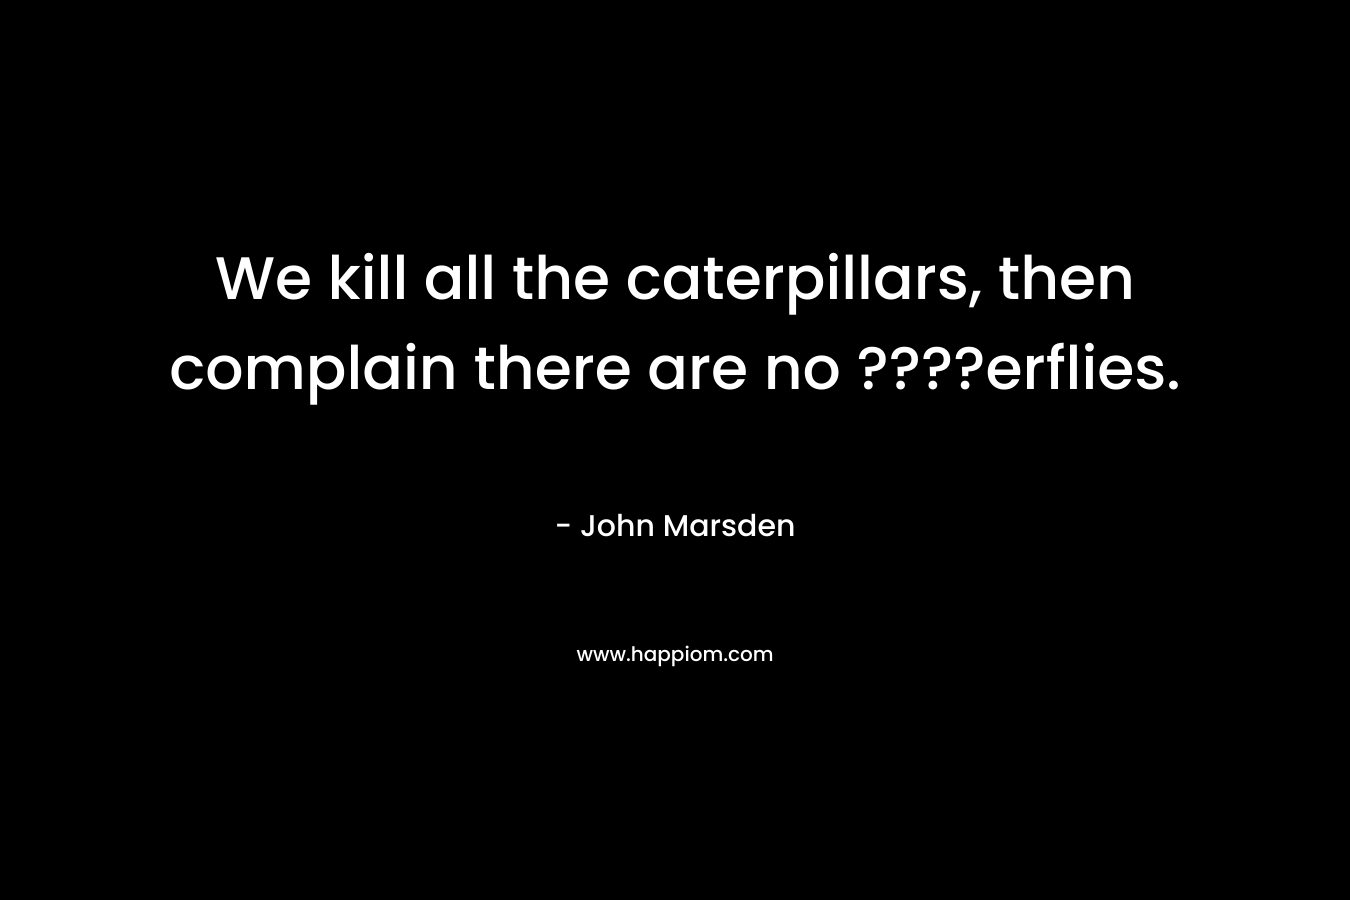 We kill all the caterpillars, then complain there are no ????erflies.